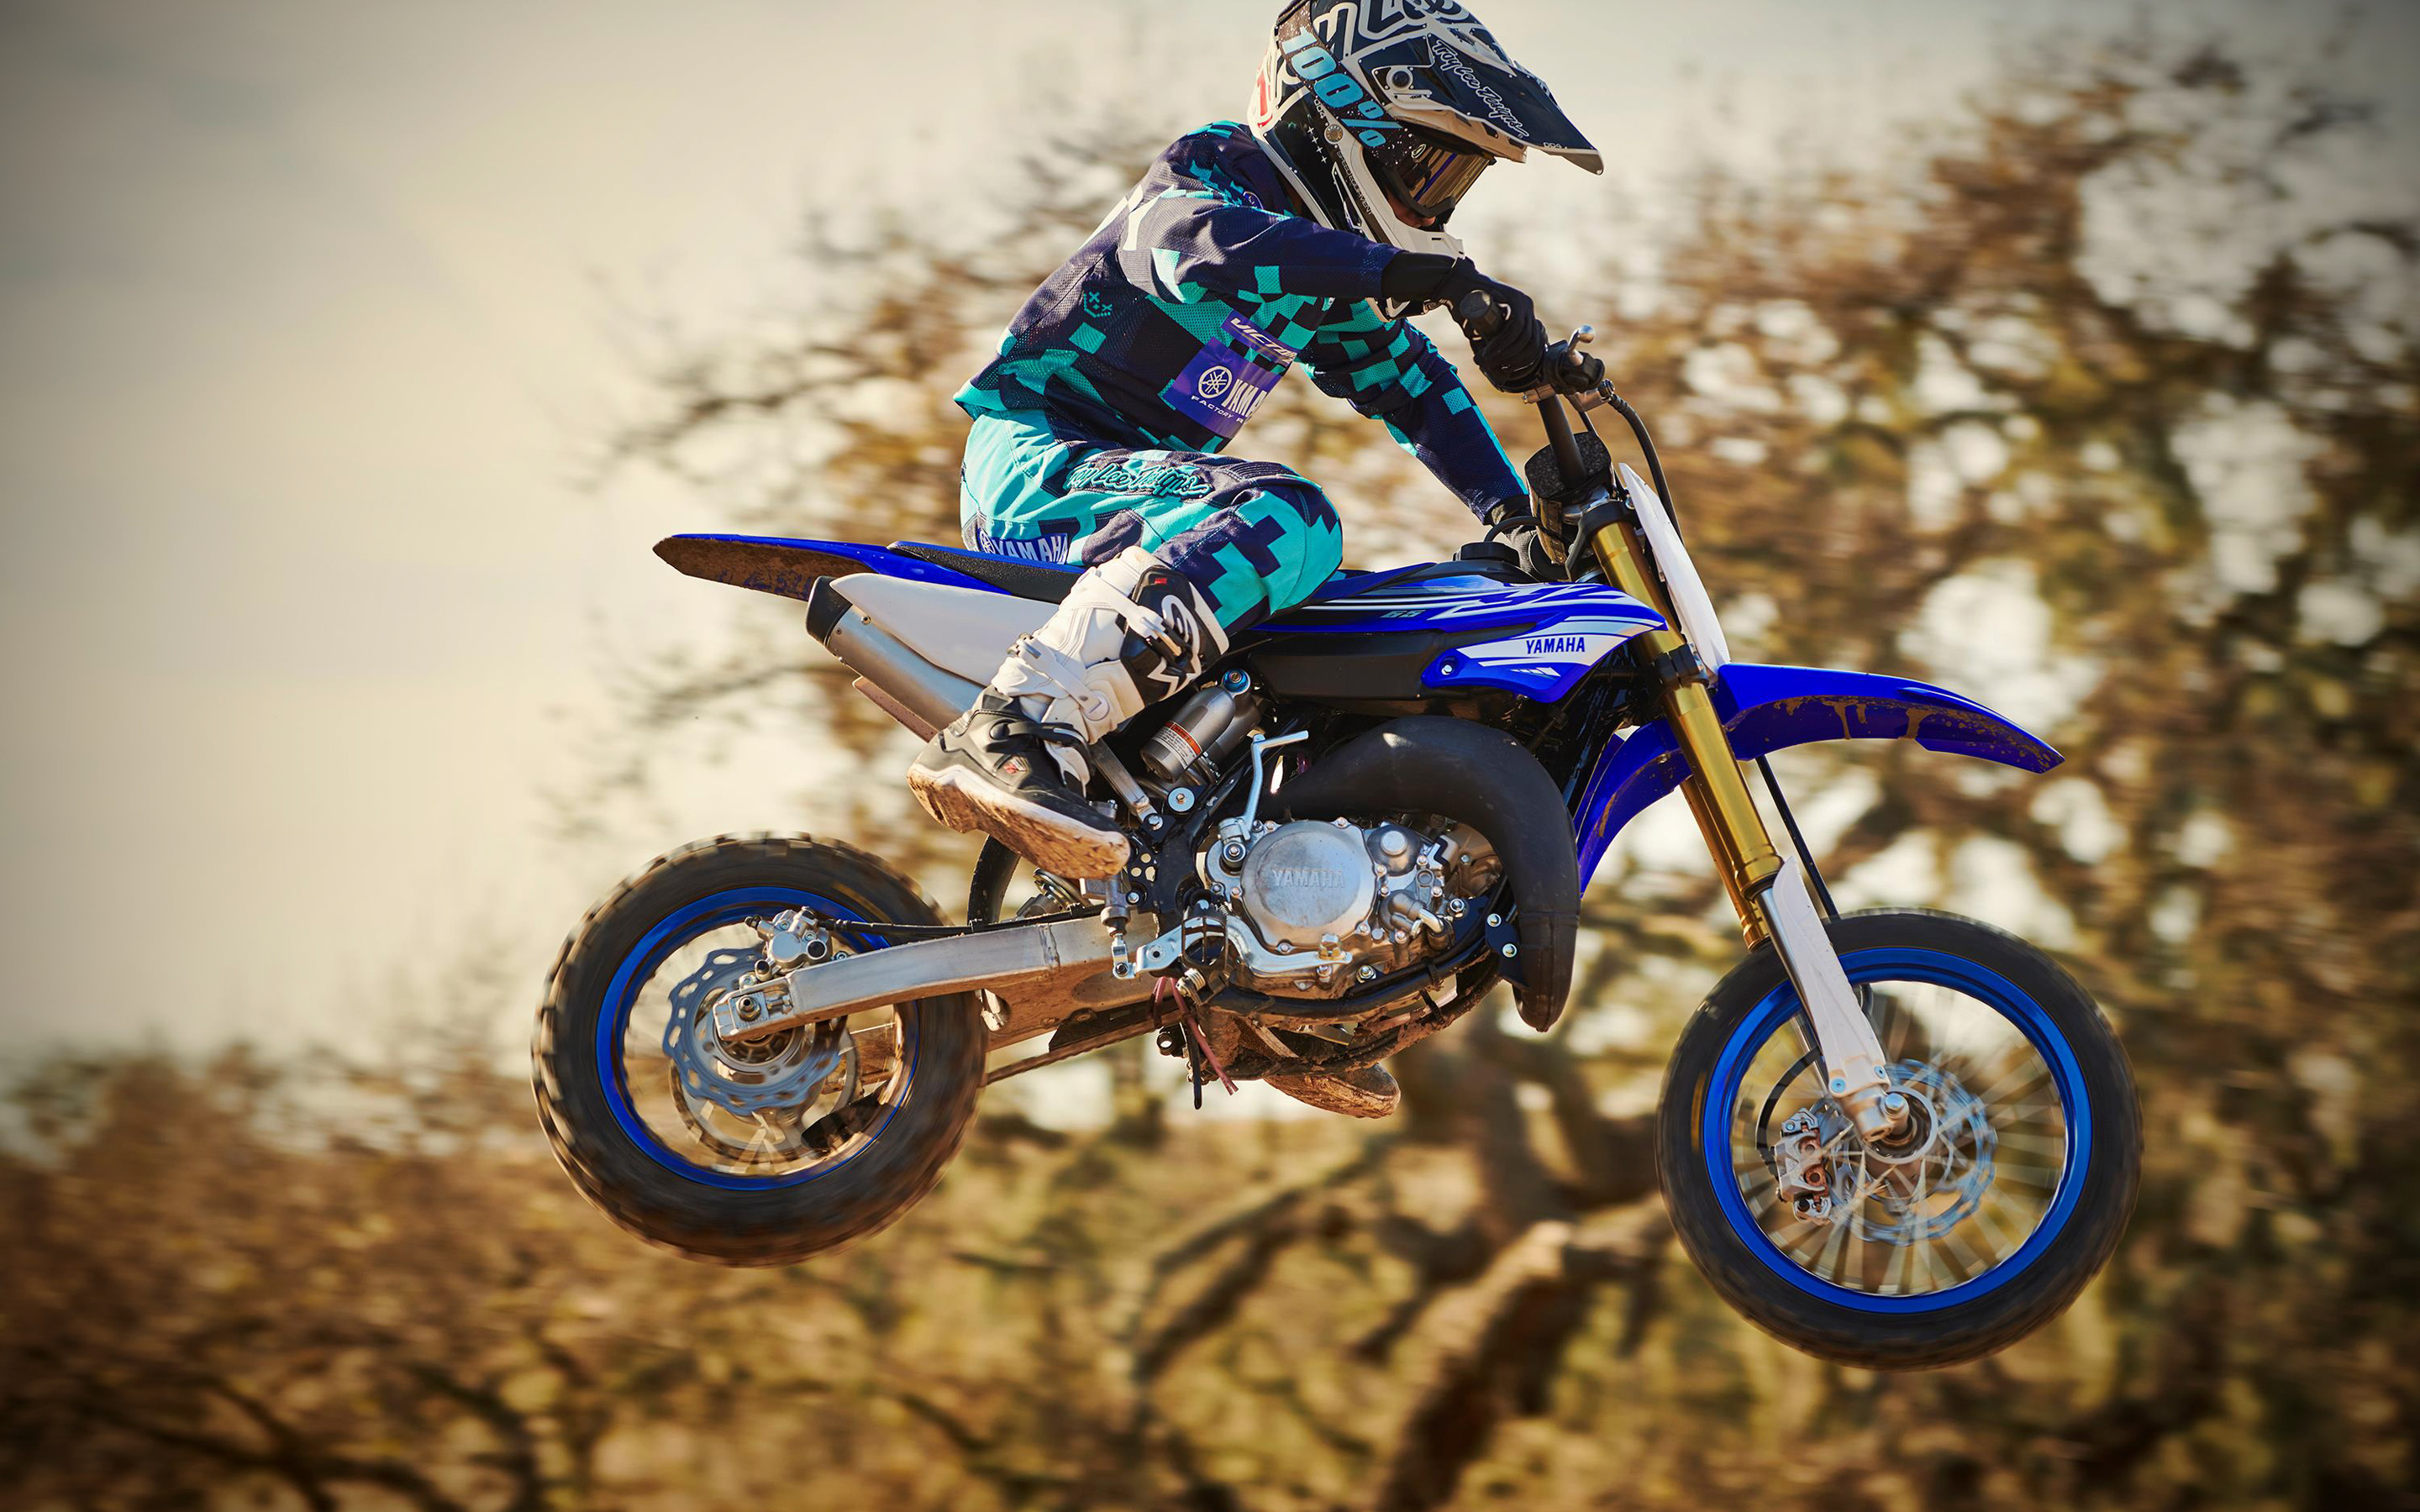 Yamaha YZ65, 4K extreme wallpaper, Flying motorcycle, High-quality pictures, 2880x1800 HD Desktop